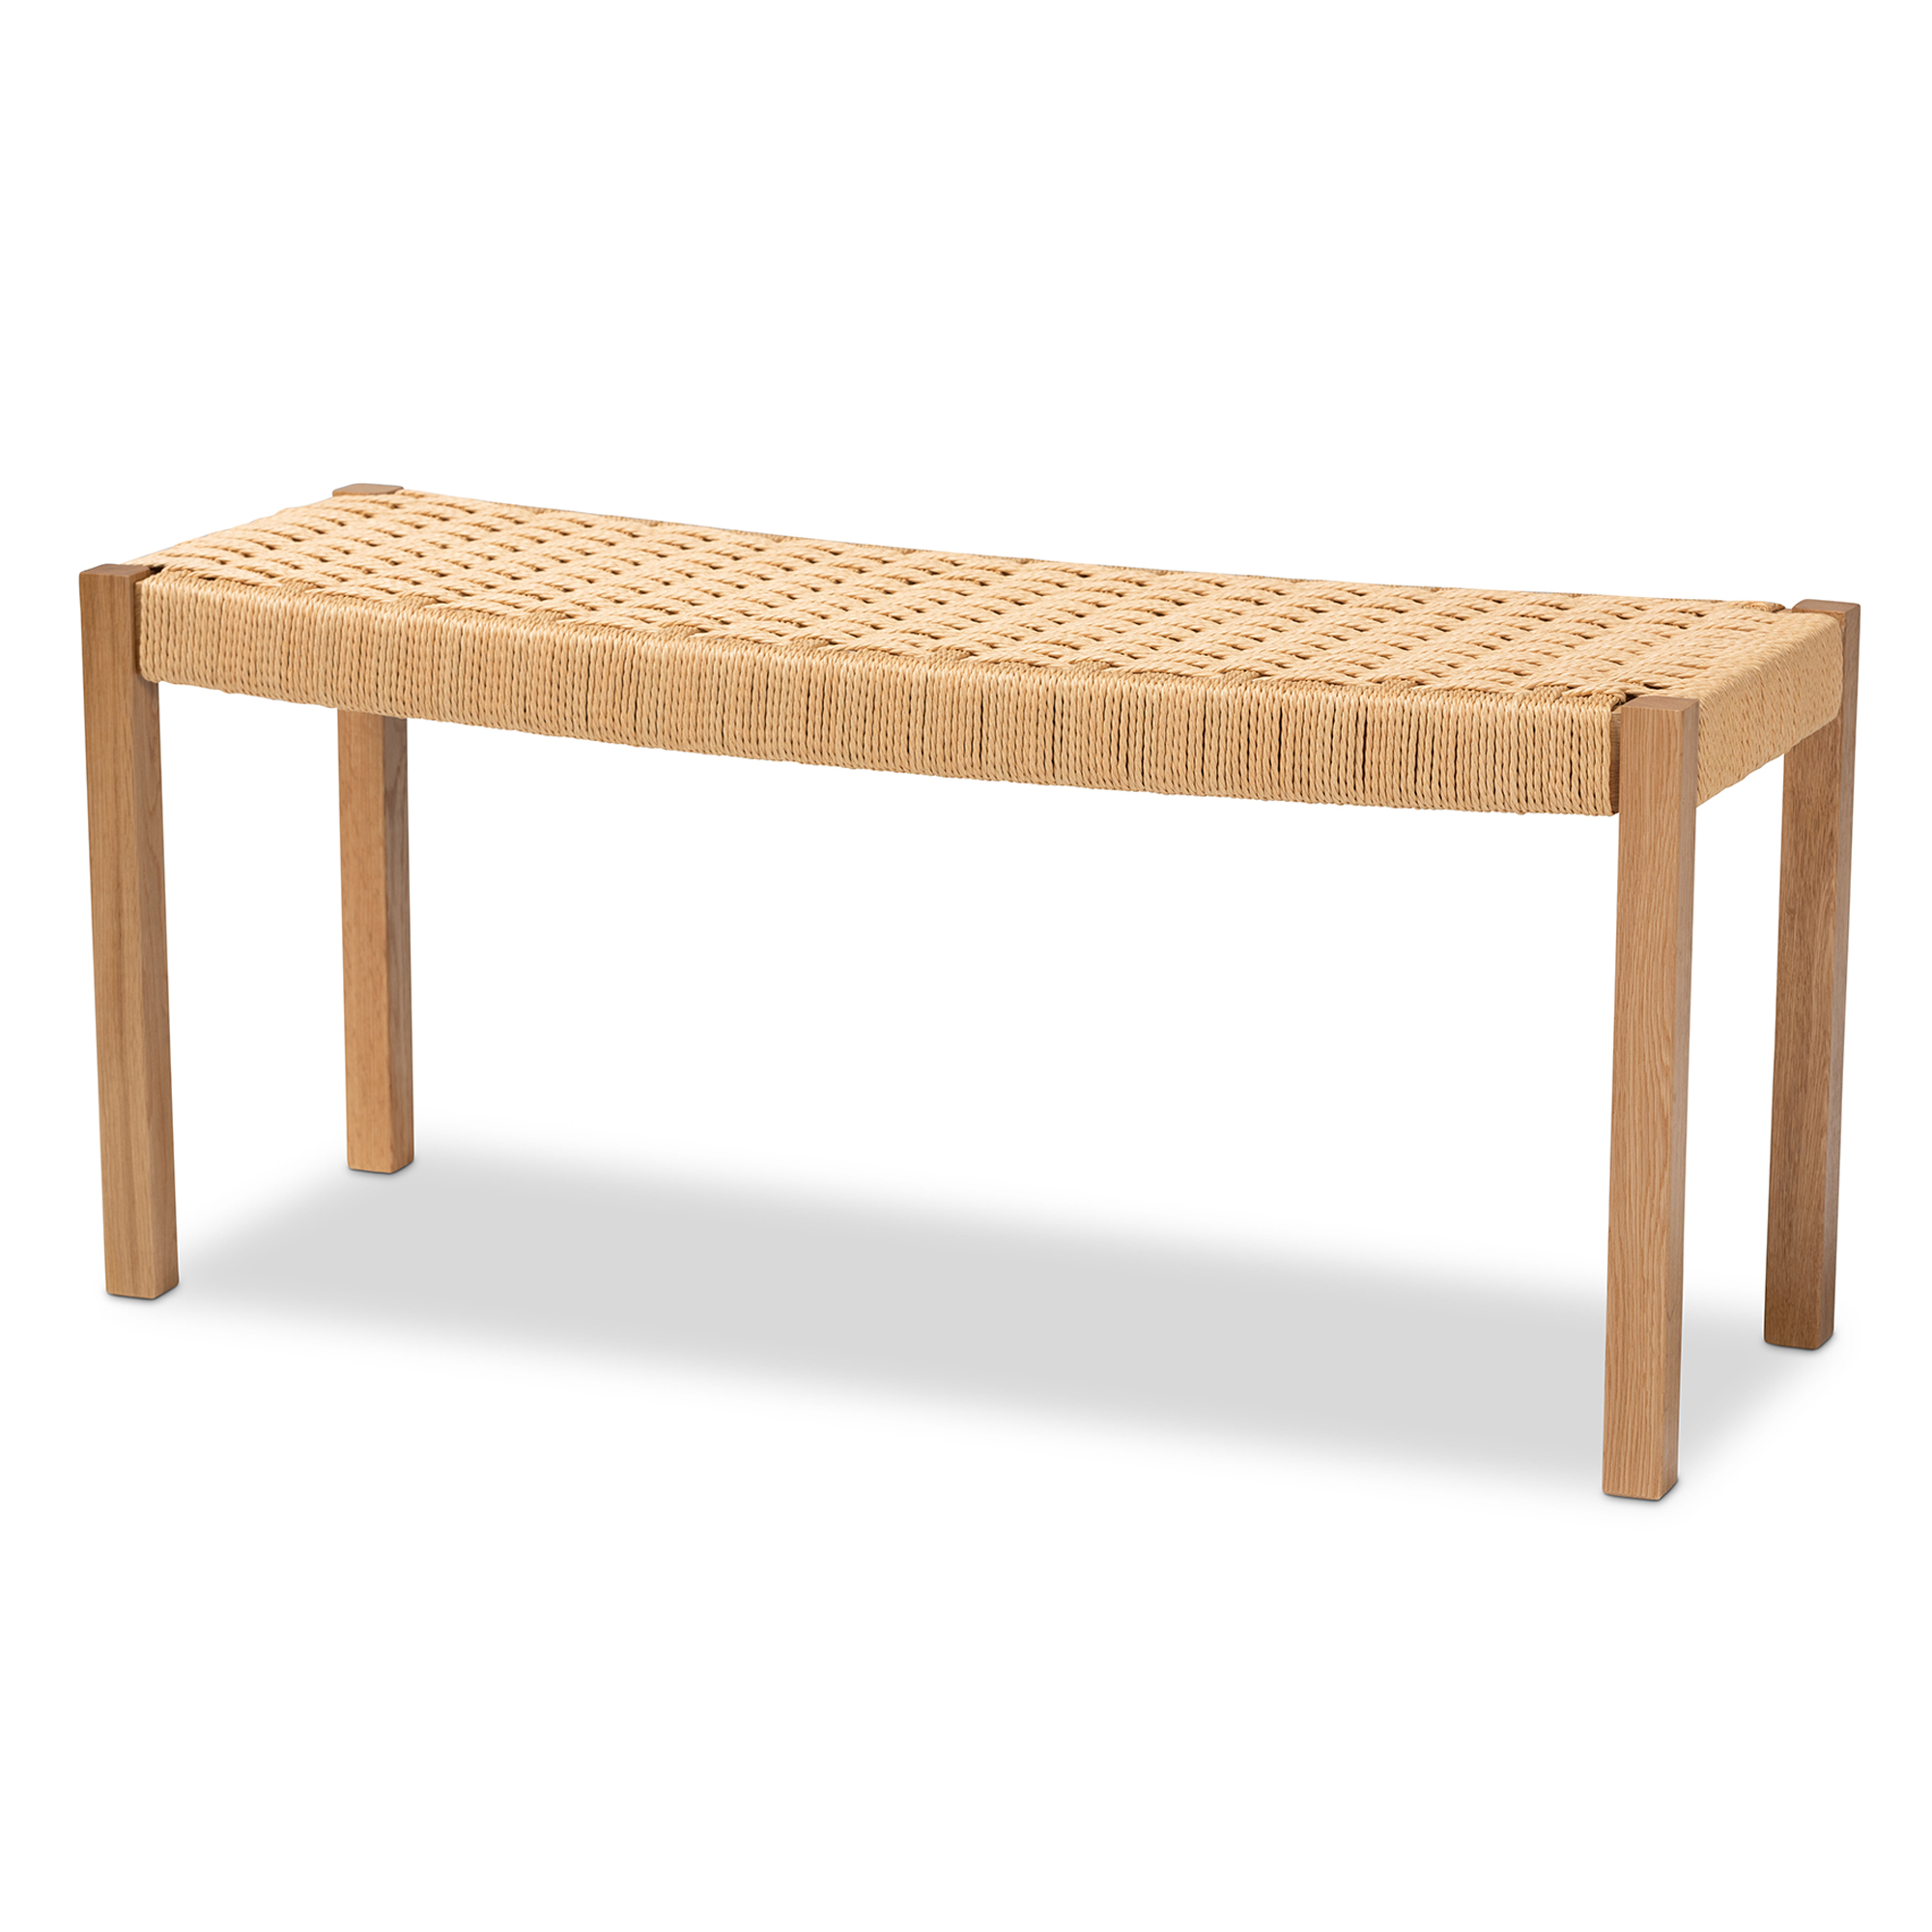 Baxton Studio Pacari Rustic Transitional Oak Brown Finished Wood and Hemp Accent Bench